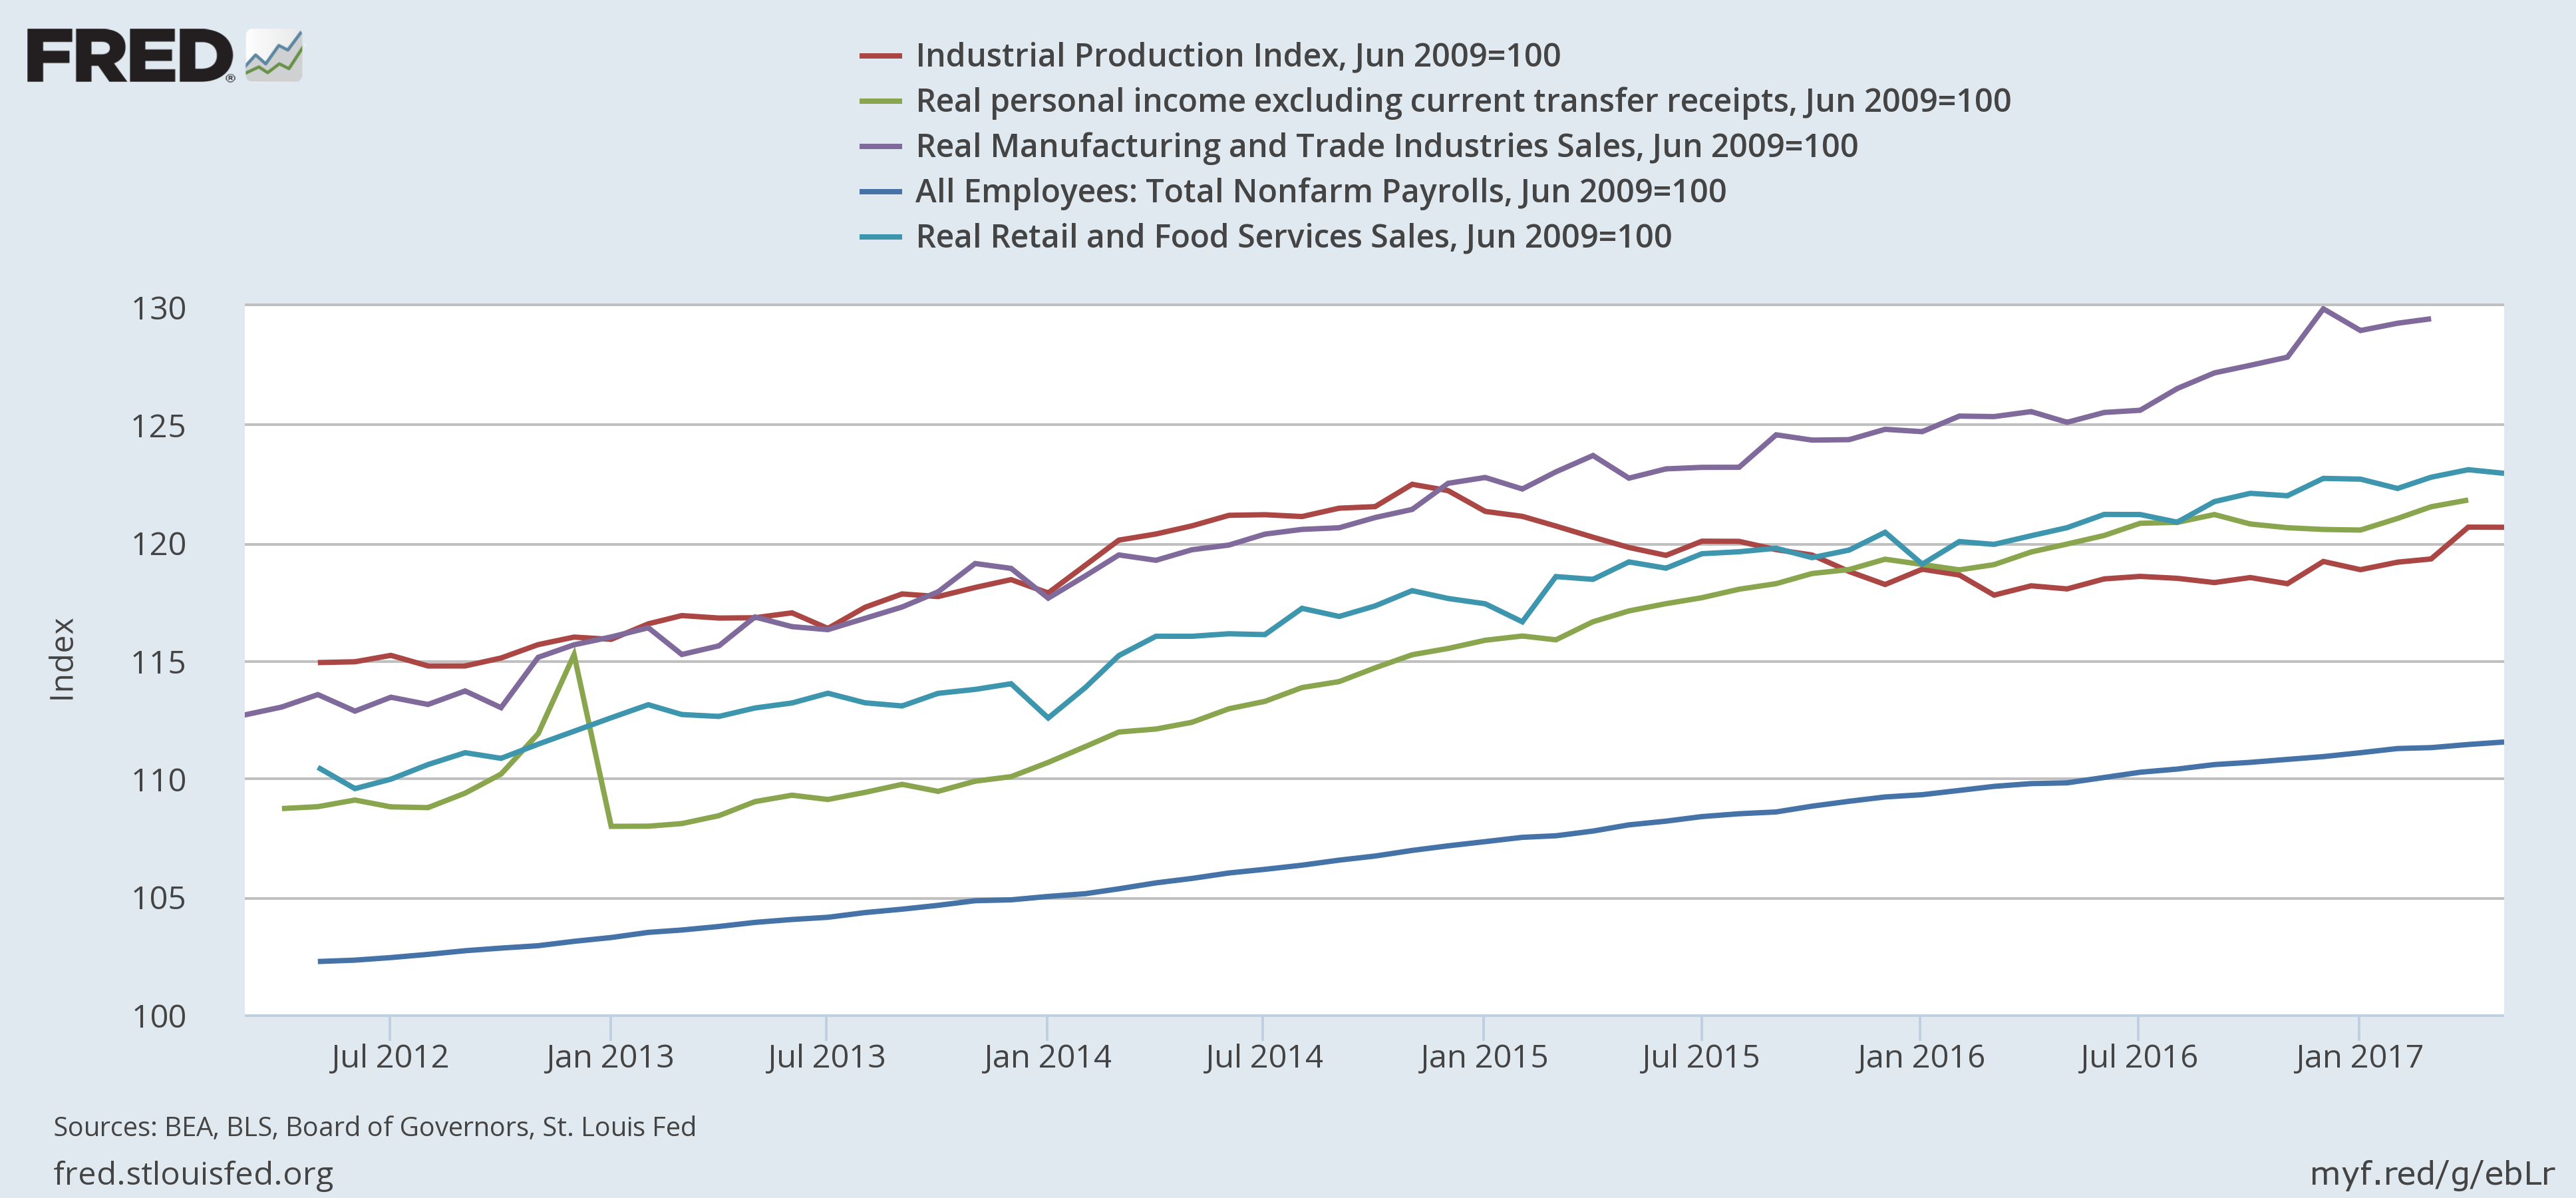 All CEIs (excl. industrial production) are in uptrends